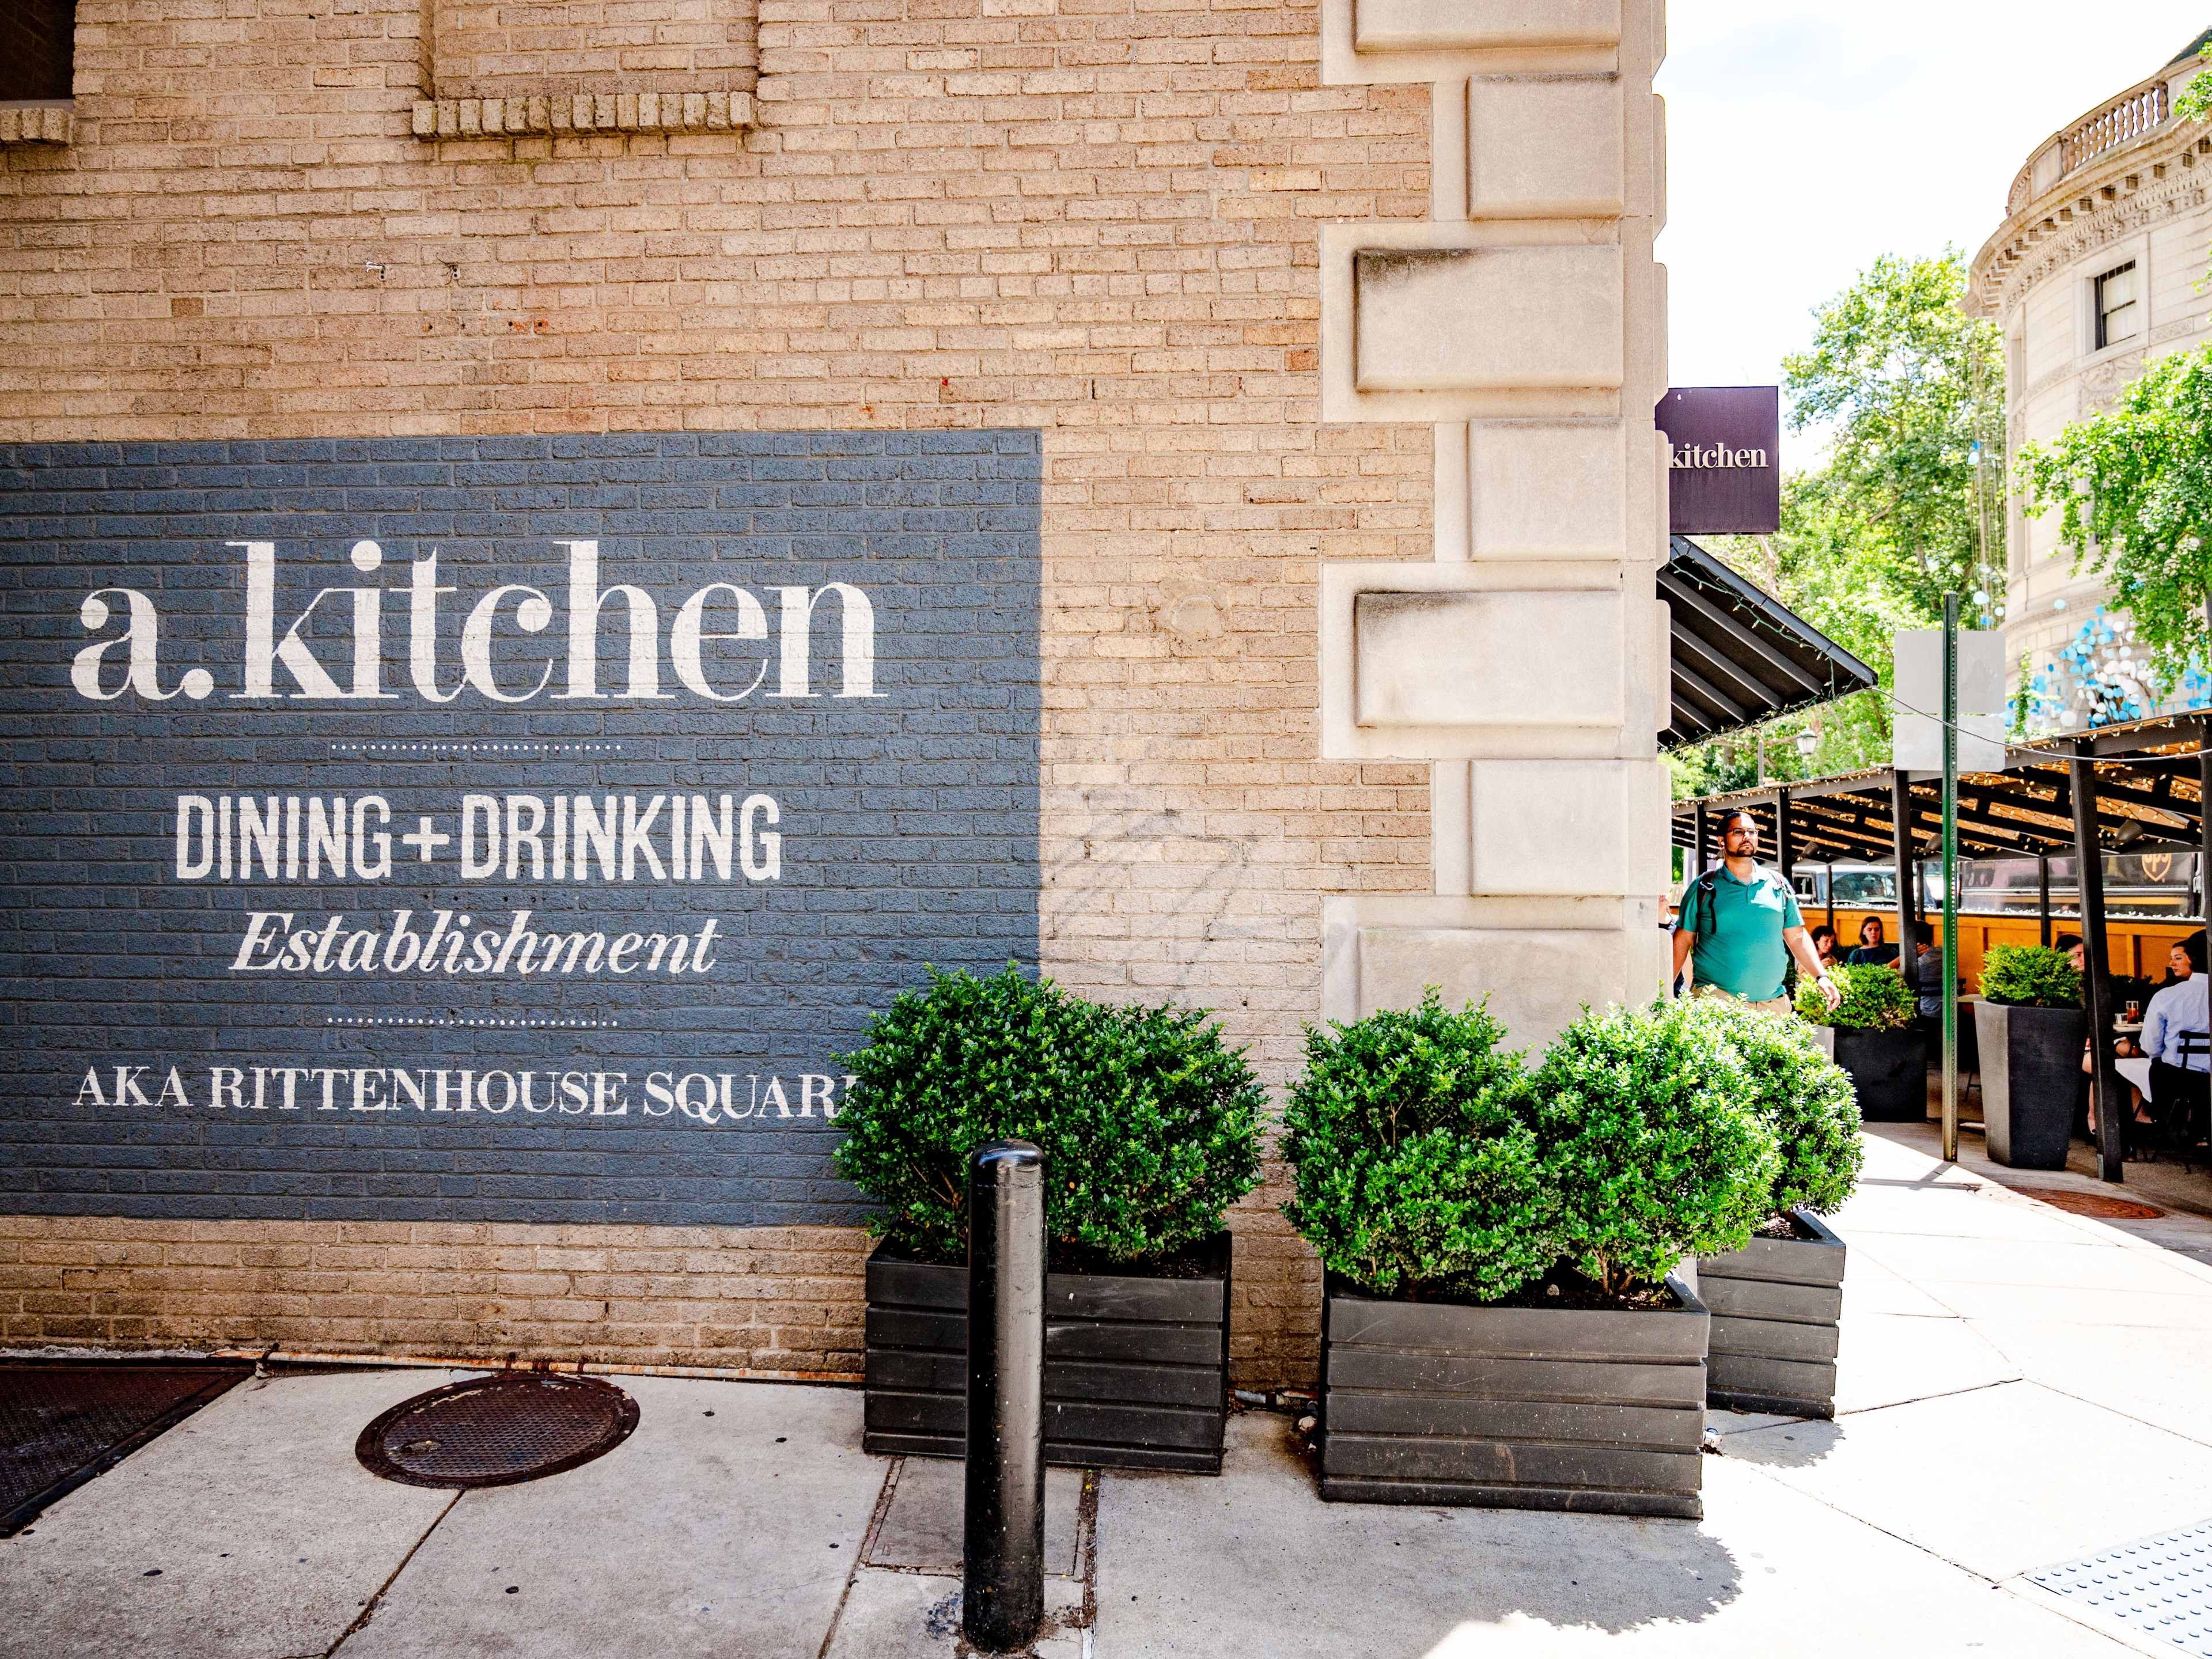 This is the exterior of a.kitchen.